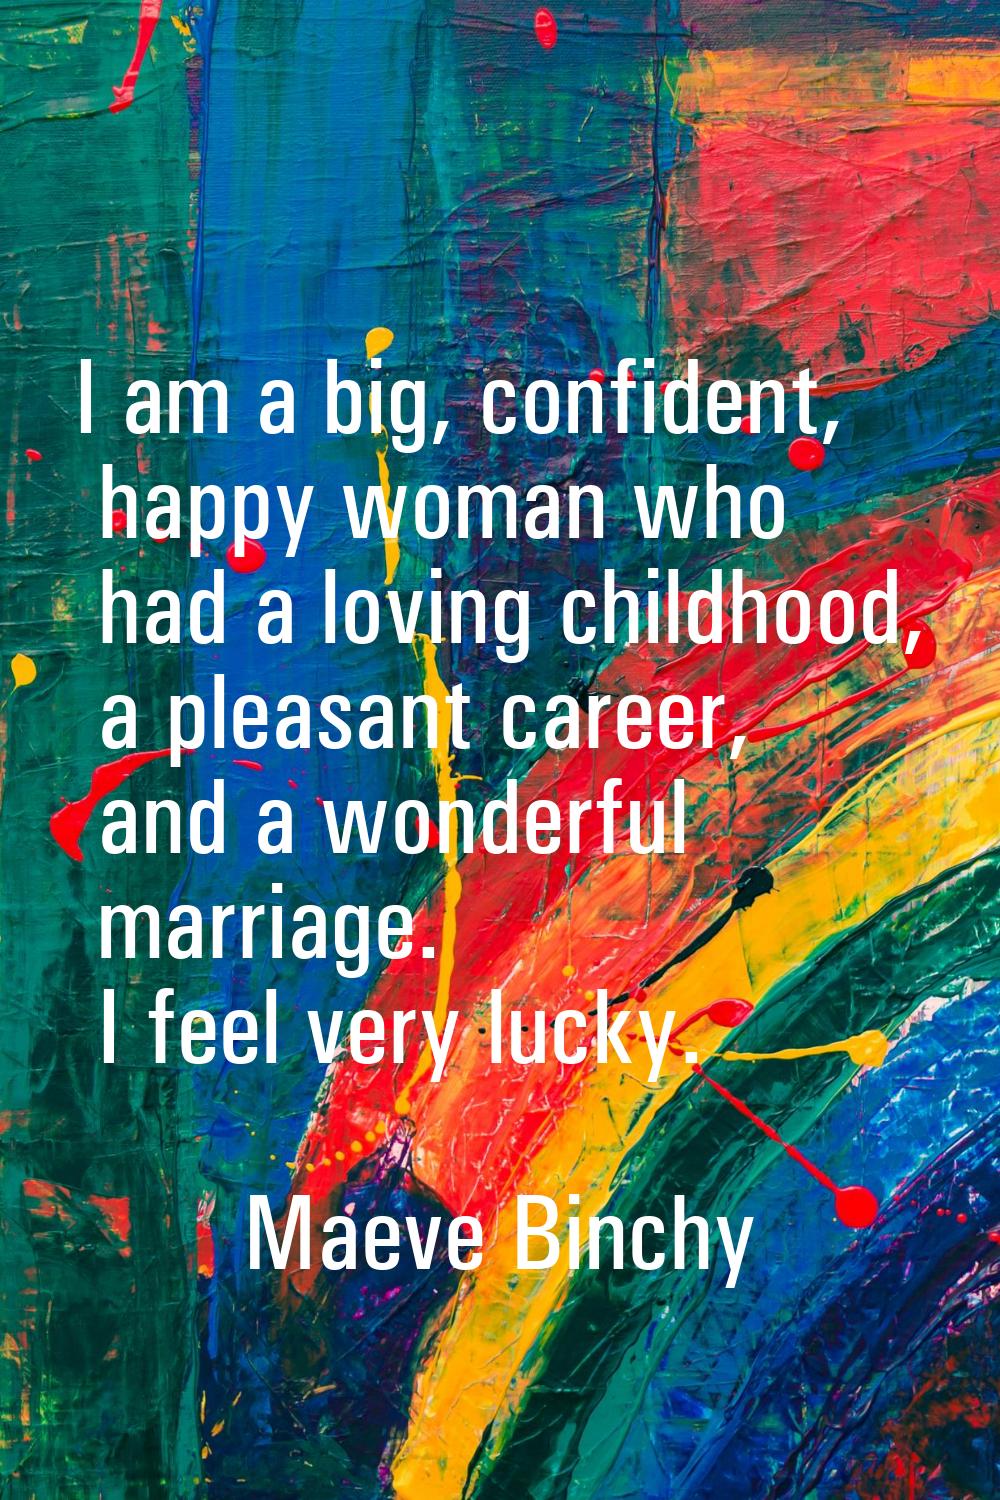 I am a big, confident, happy woman who had a loving childhood, a pleasant career, and a wonderful m